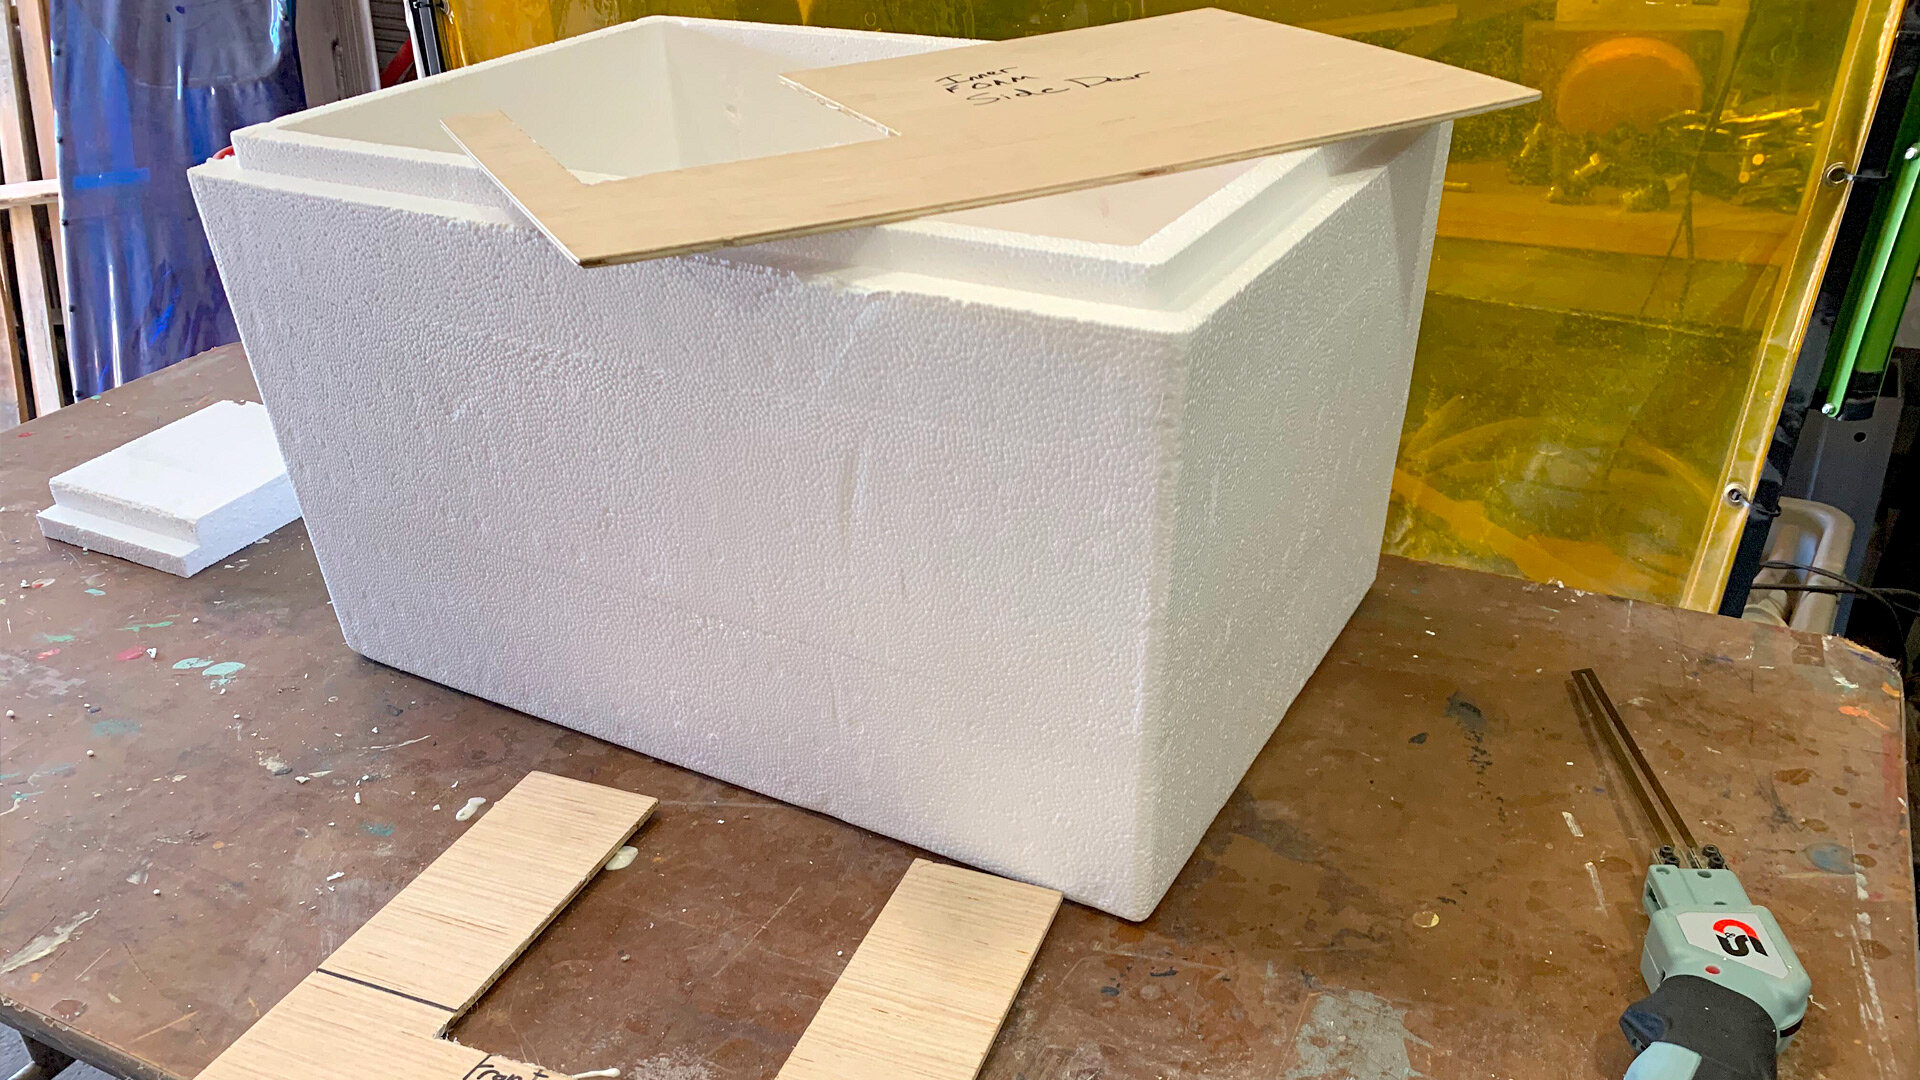  We made templates to be sure all of our door openings landed in the right places and made short work of the Styrofoam using heated foam carving knives. We also tested an electric carving knife and that worked, but it was not really as efficient for 